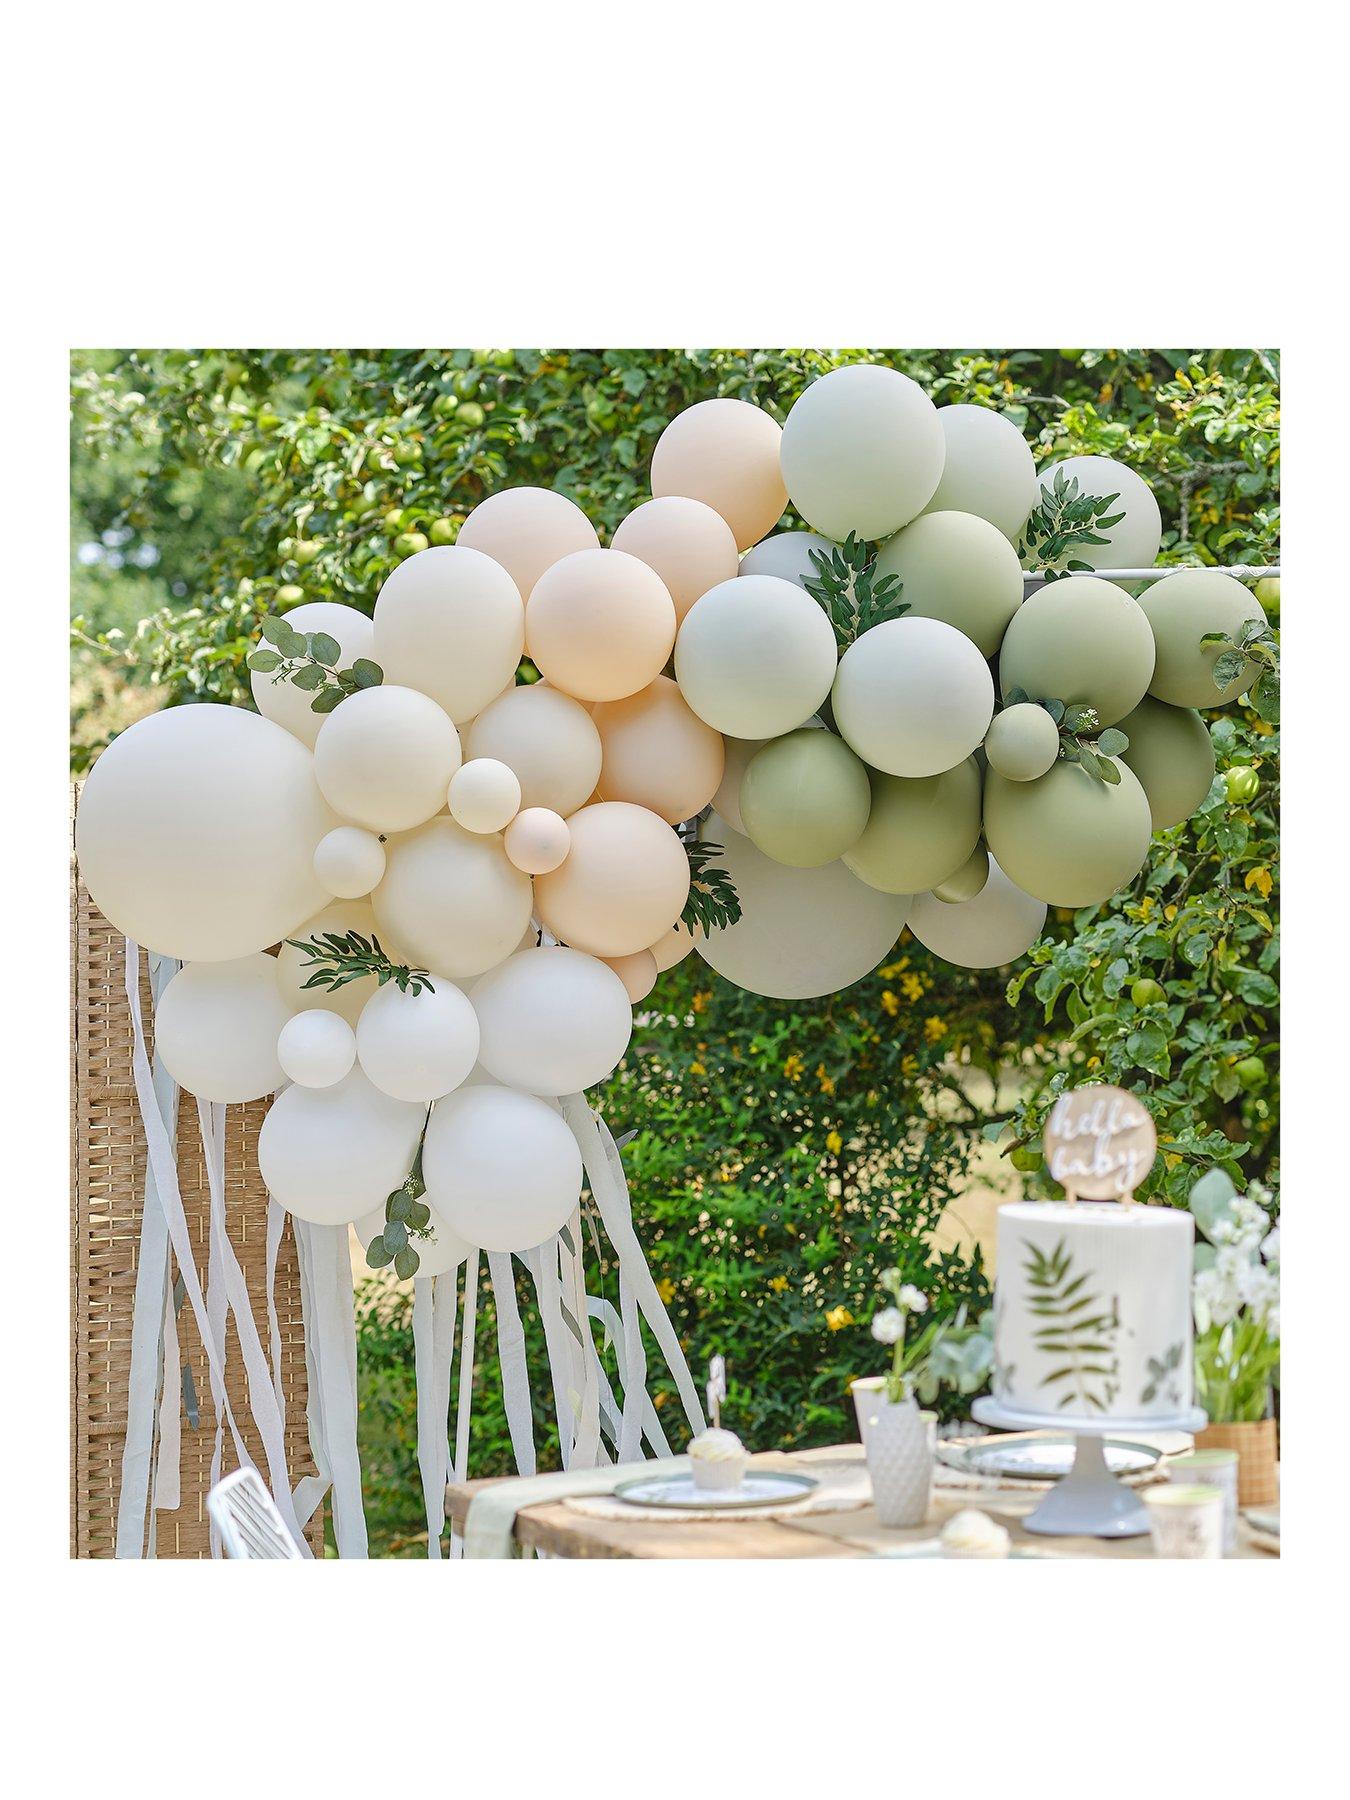 https://media.very.ie/i/littlewoodsireland/VJ7TS_SQ1_0000000099_N_A_SLf/ginger-ray-balloon-arch-streamers-and-leaves-green-and-nude.jpg?$180x240_retinamobilex2$&$roundel_lwireland$&p1_img=vsp_pink